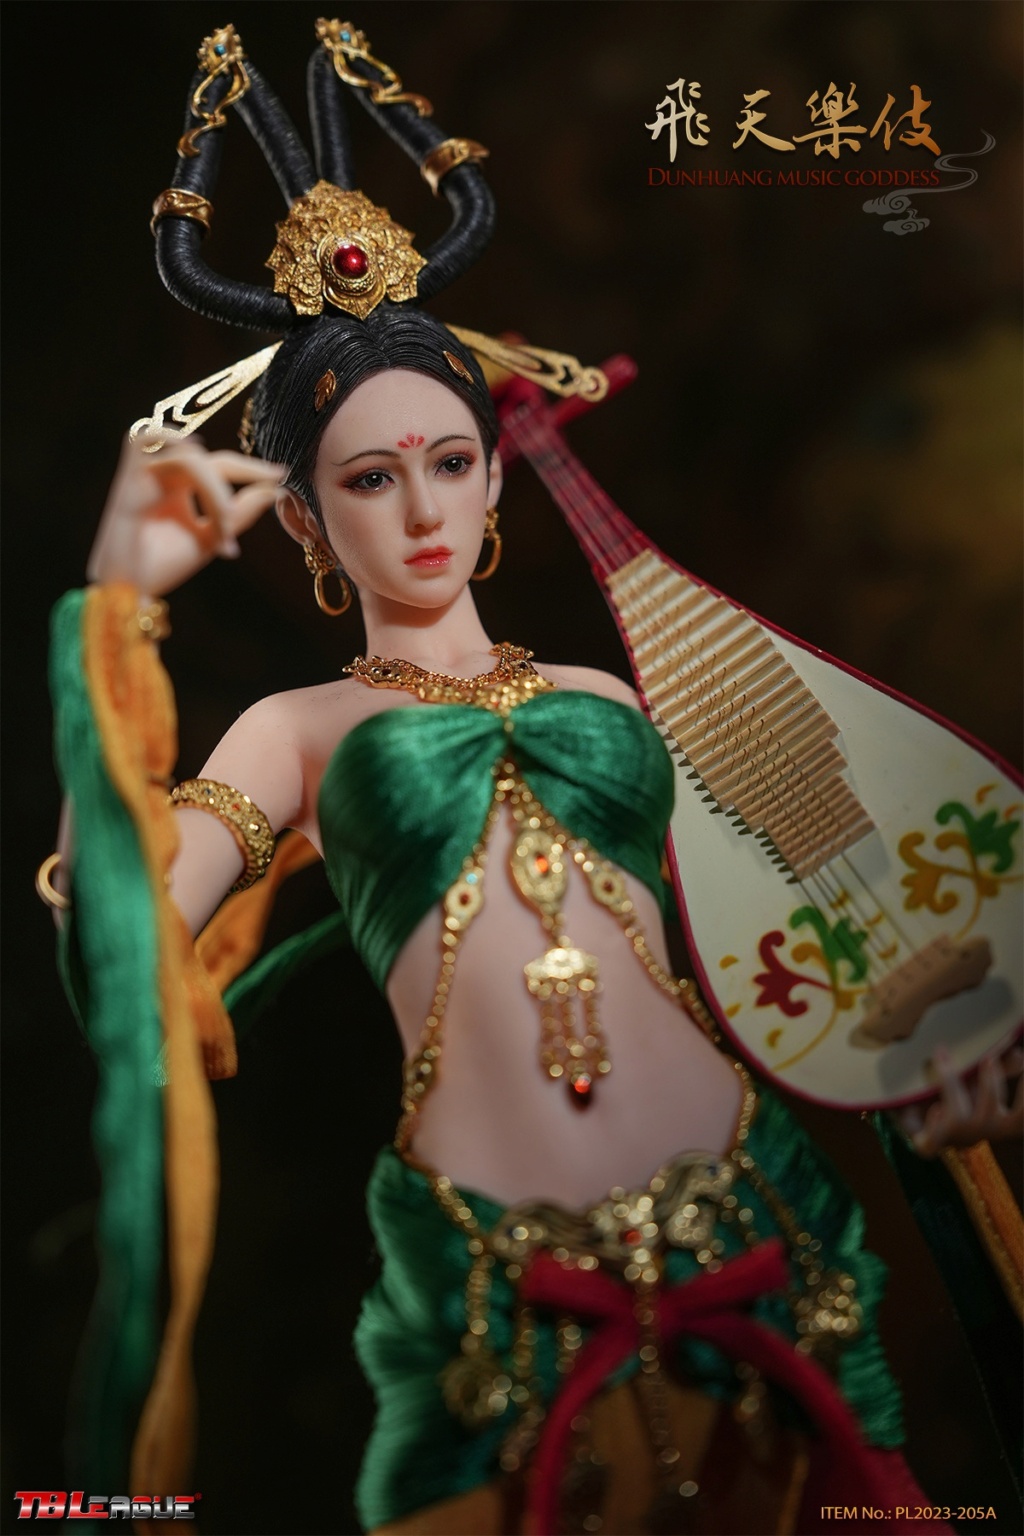 NEW PRODUCT: TBLeague: PL2023-205 1/6 Scale Dunhuang Music Goddess (2 versions) 15121311